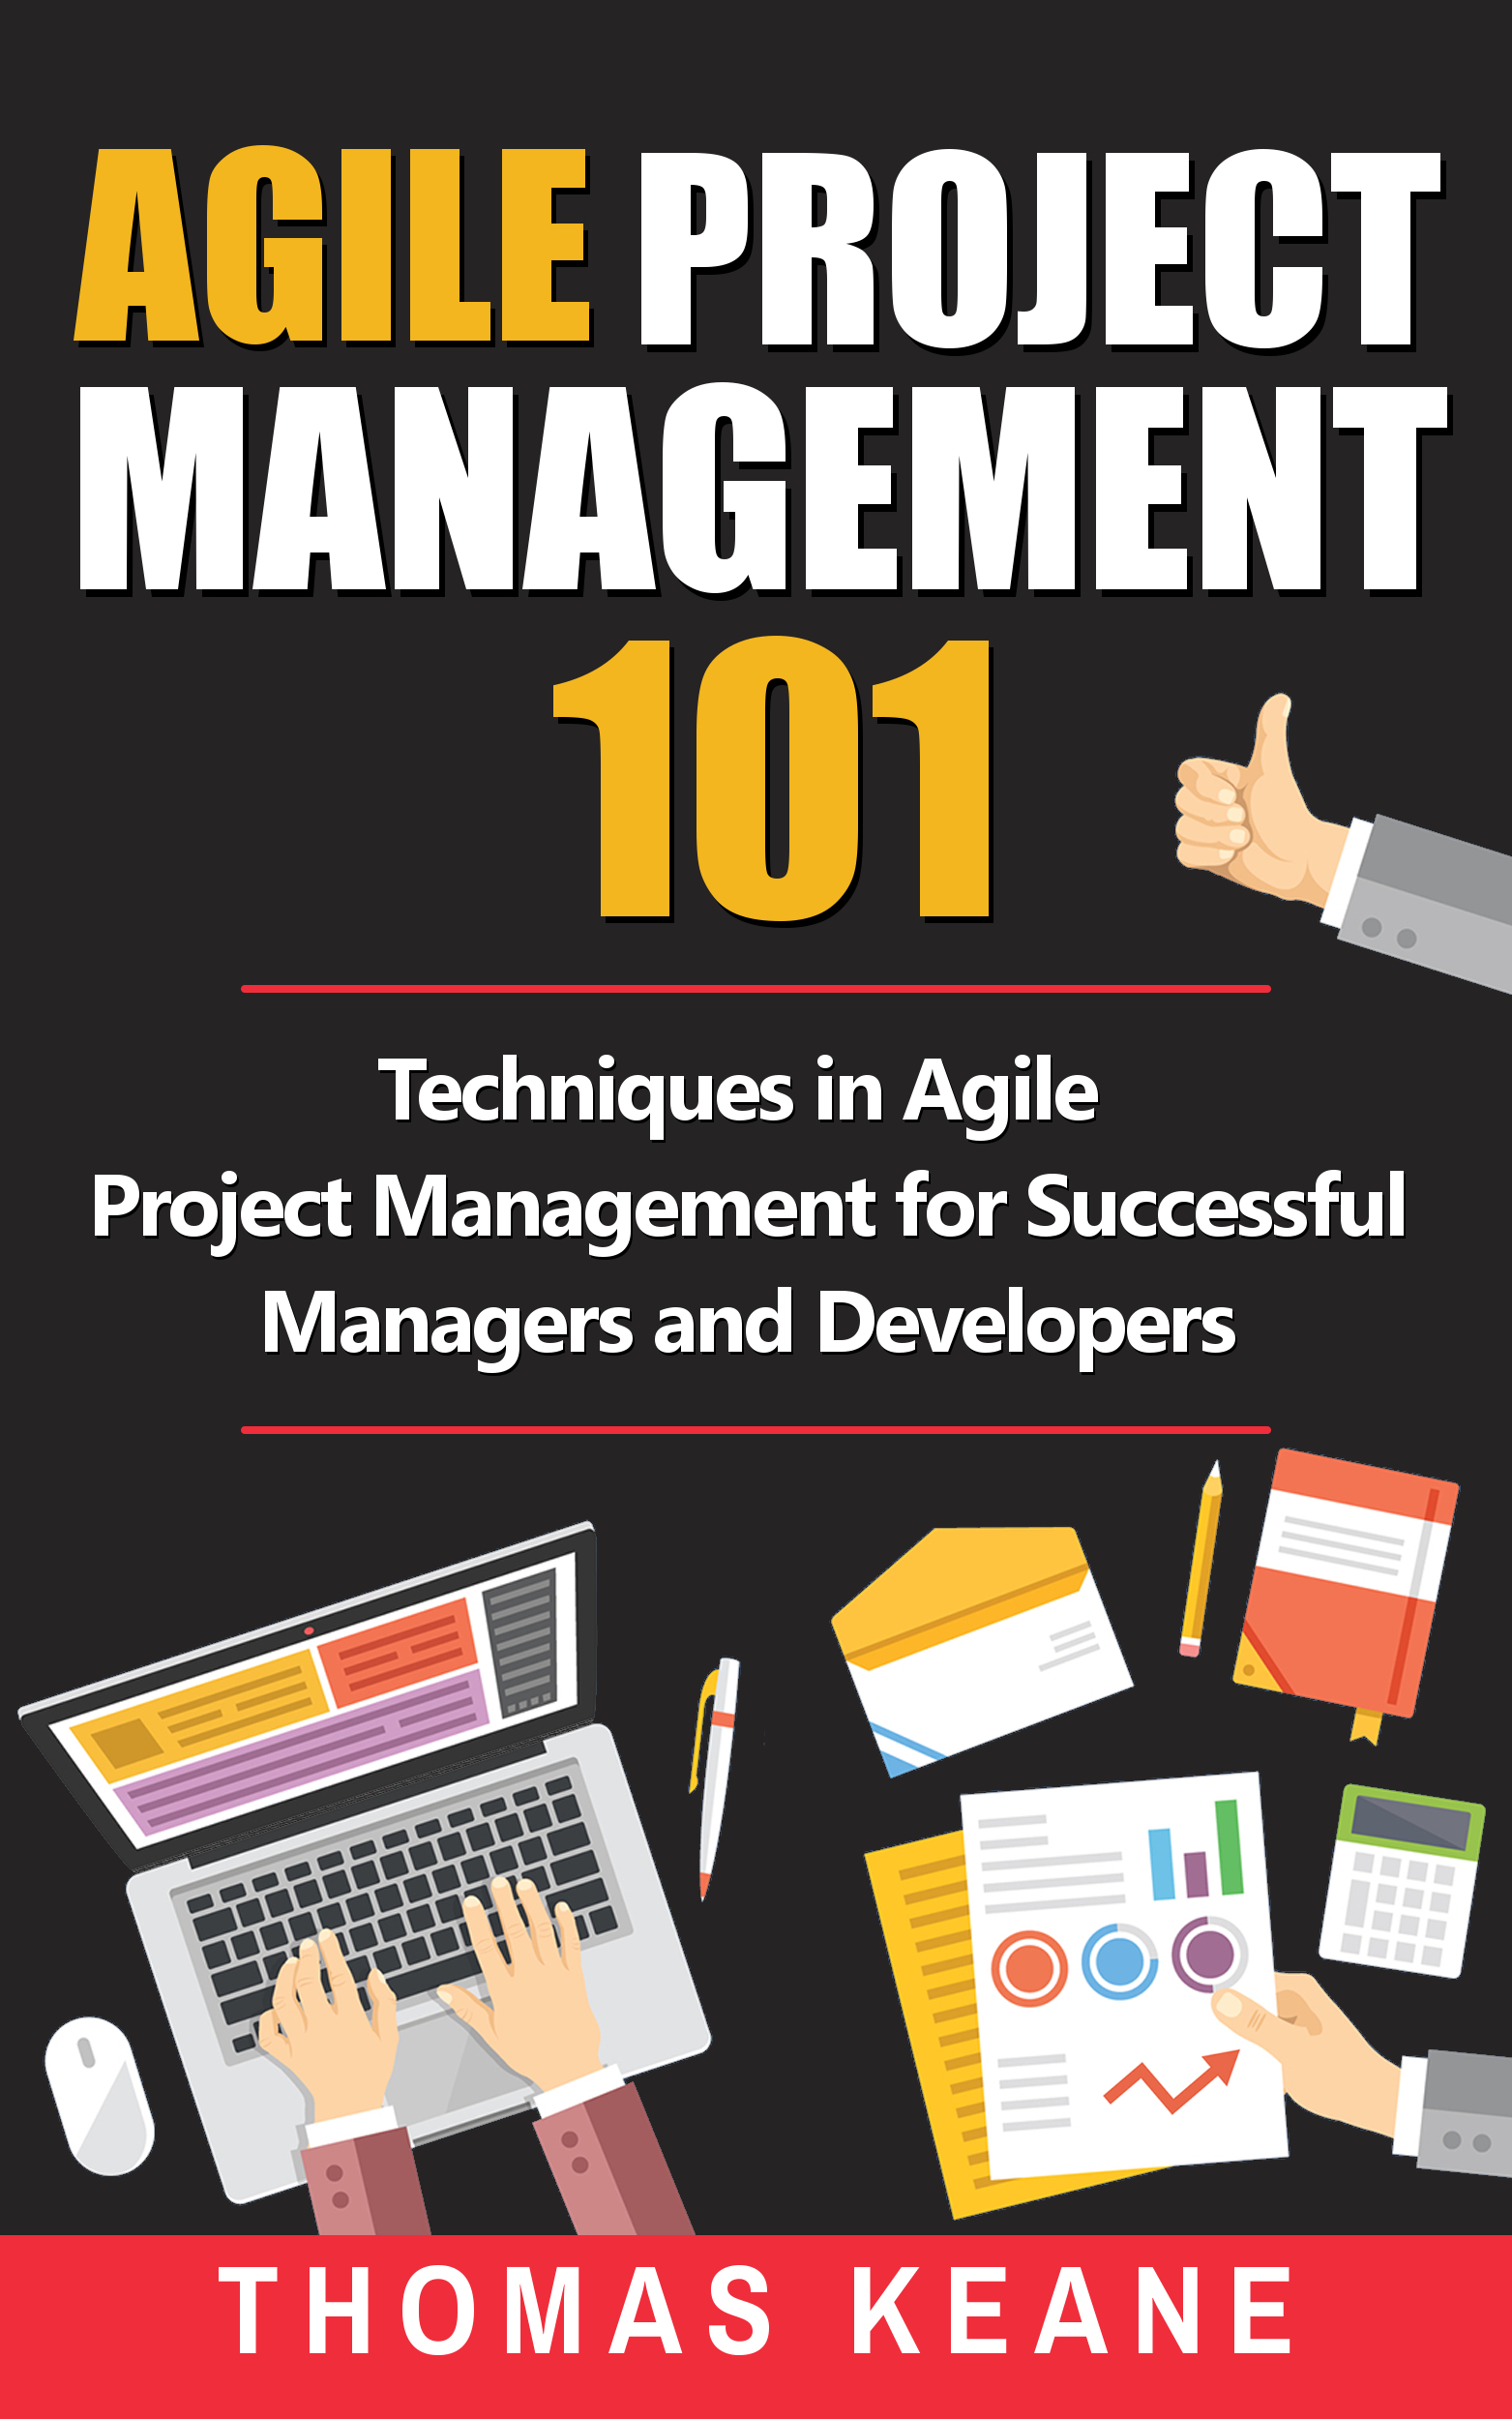 FREE: Agile Project Management 101: Techniques in Agile Project Management for Successful Managers and Developers by Thomas Keane